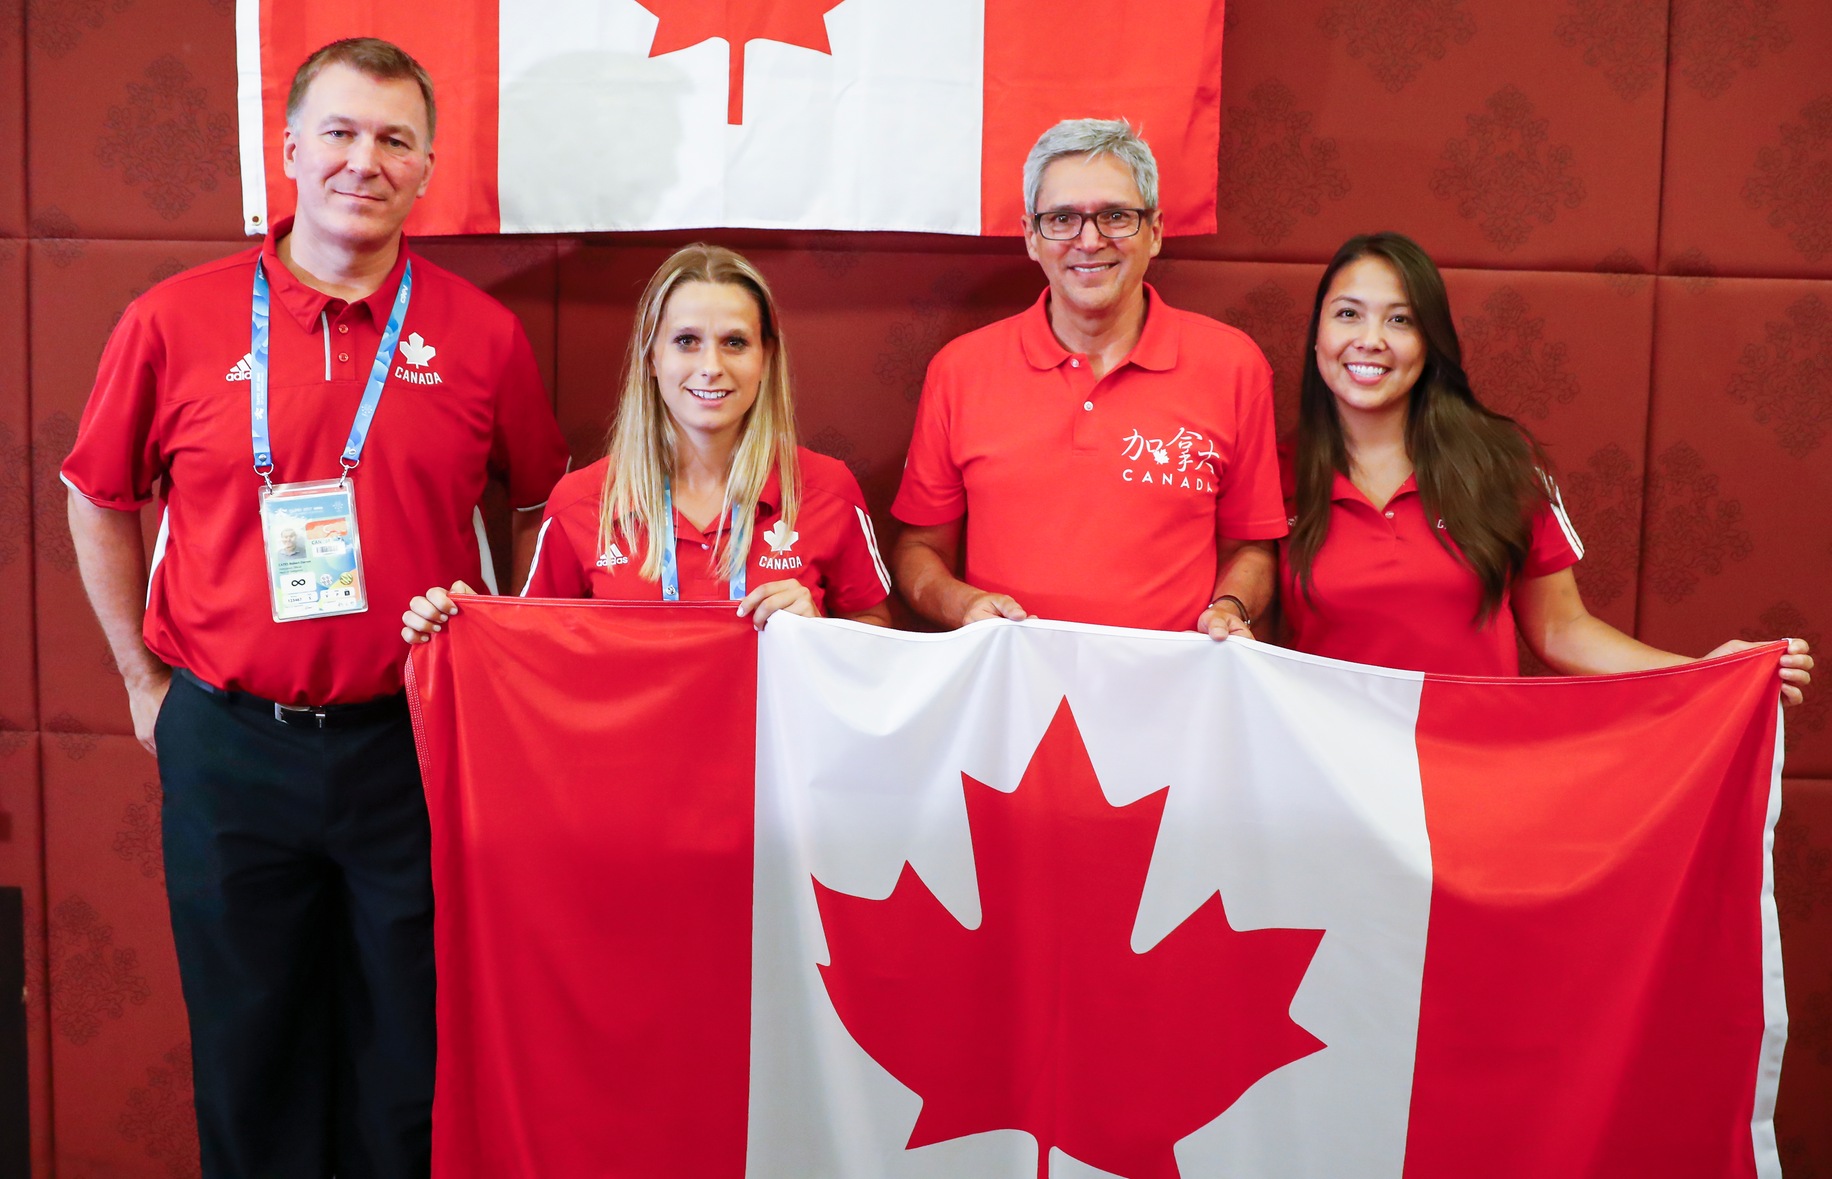 From left to right: Team Canada head of delegation Darren Cates, Team Canada flag bearer Arielle Roy-Petitclerc, Executive director to the Canadian Trade Office in Taipei Mr. Mario Ste-Marie, Team Canada Deputy head of delegation Lia Taha Cheng.